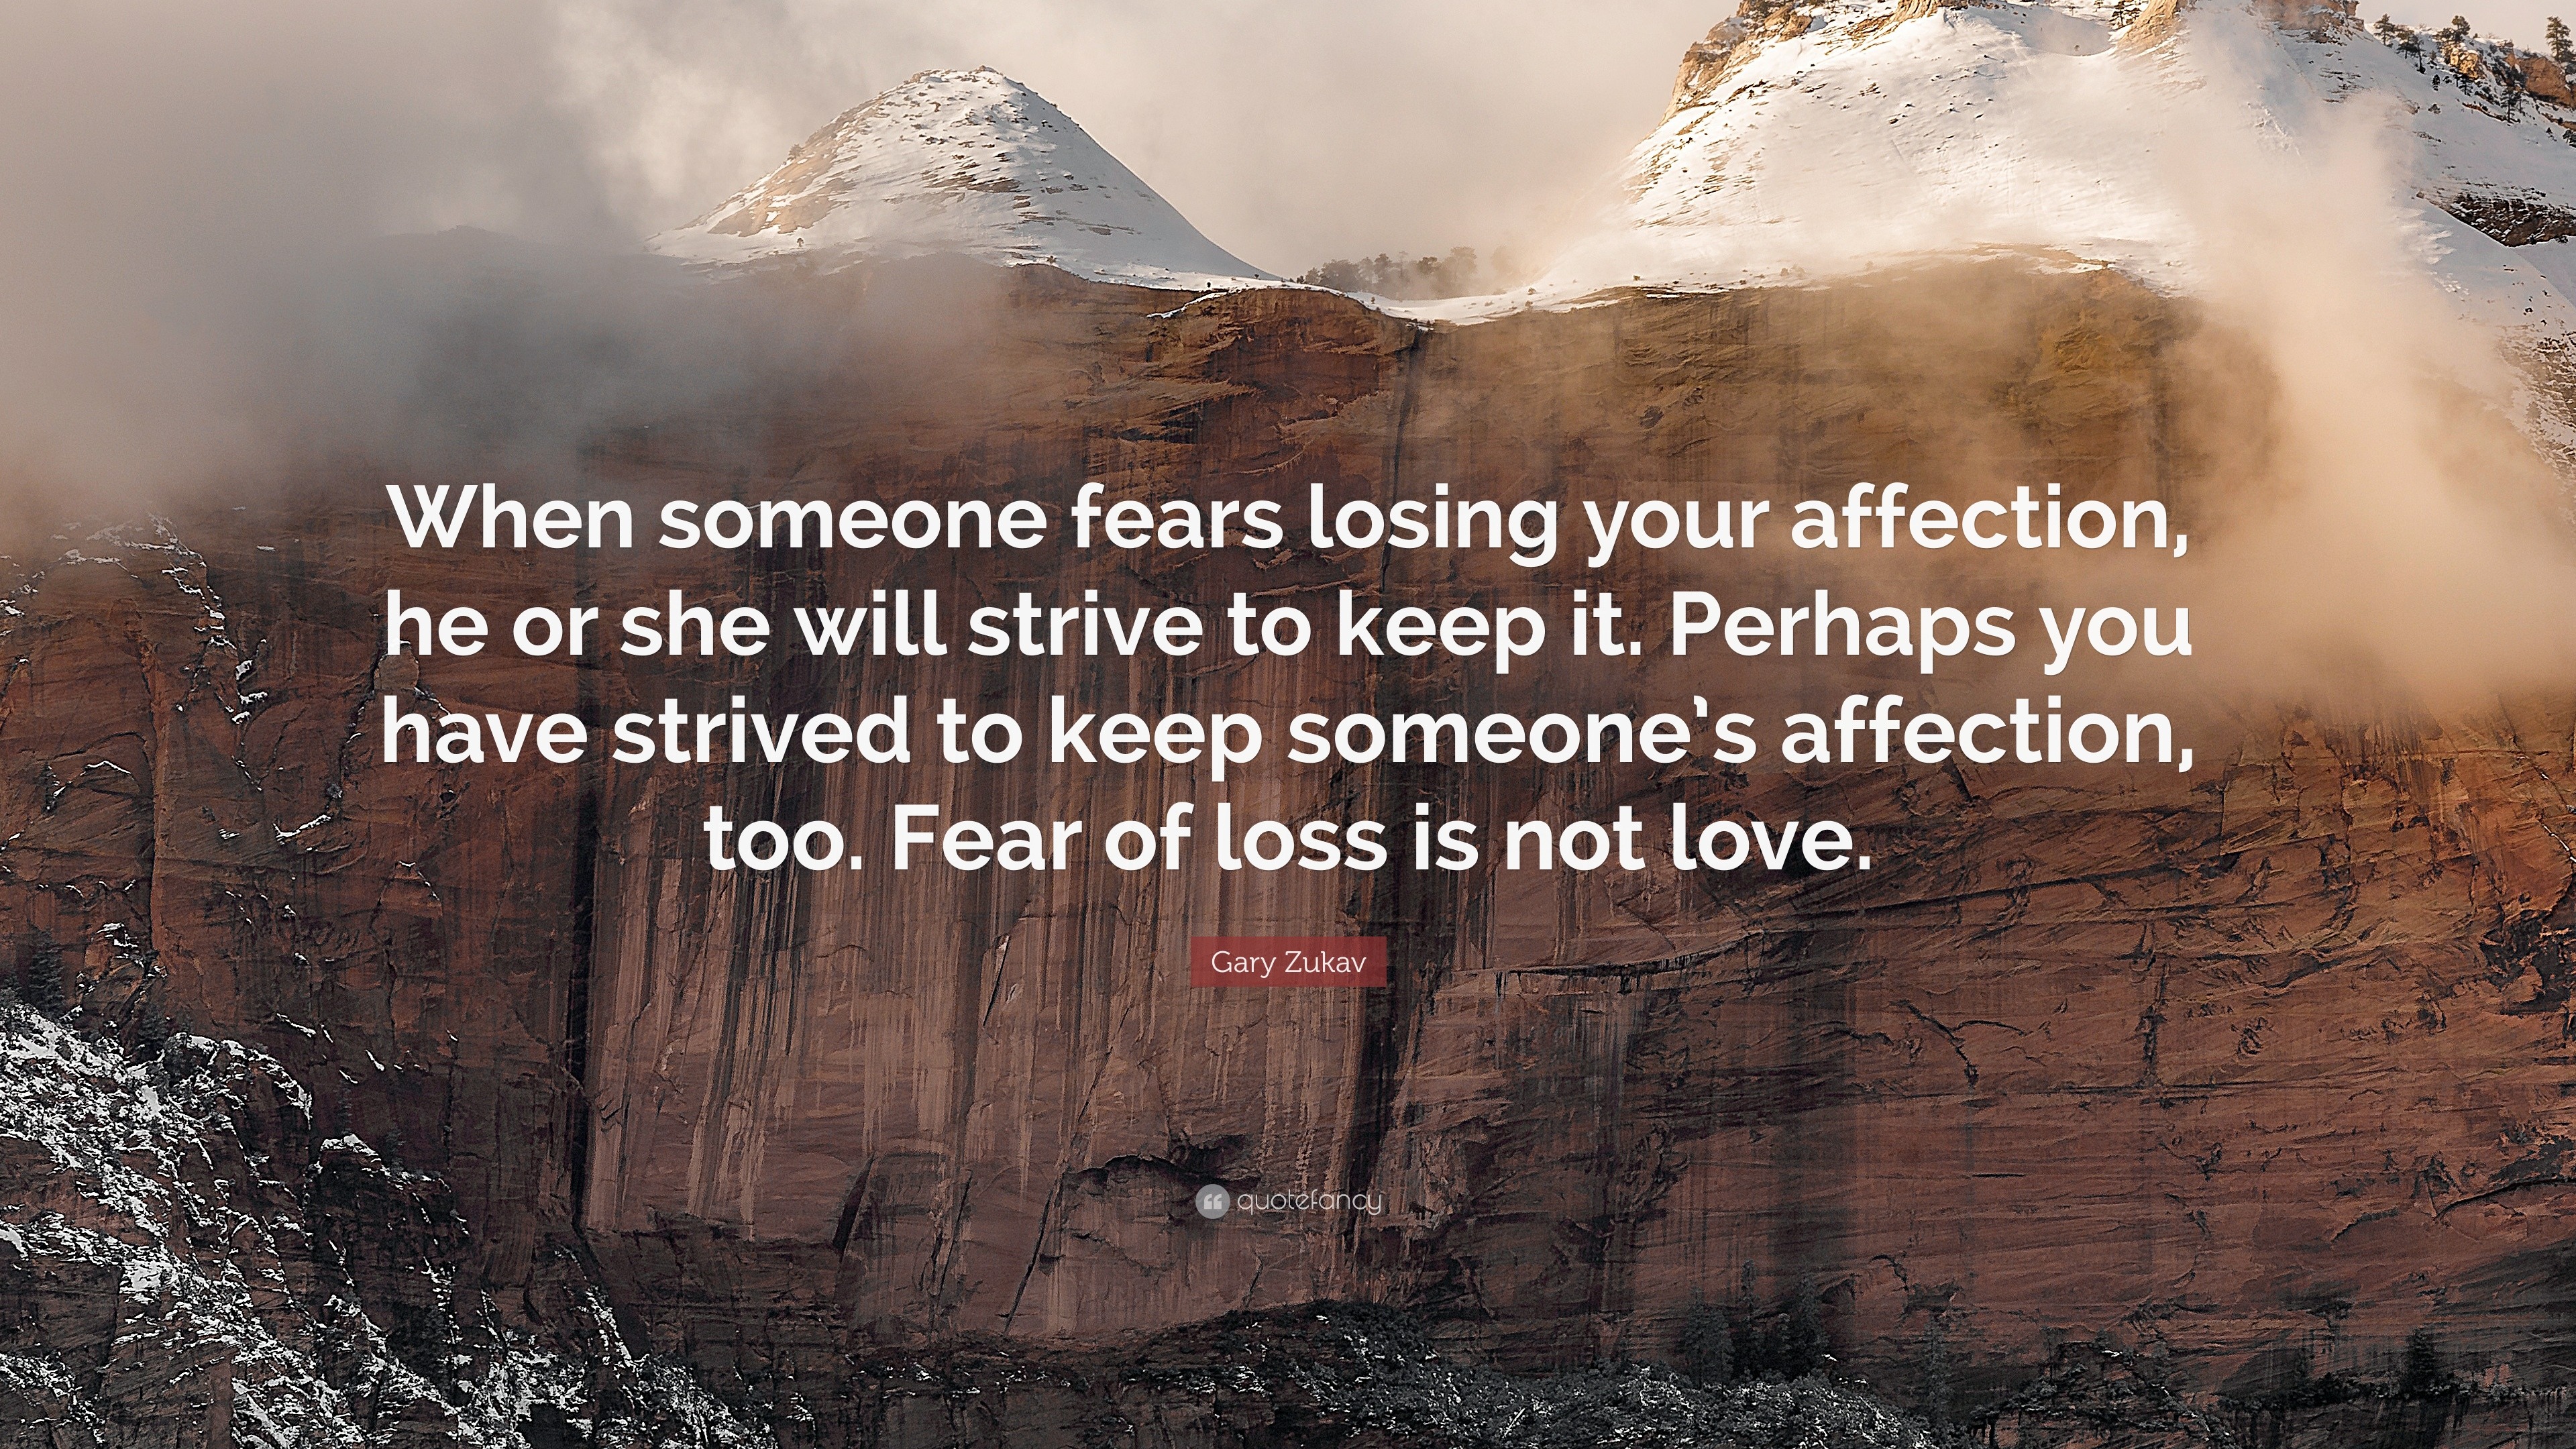 Gary Zukav Quote “When someone fears losing your affection he or she will